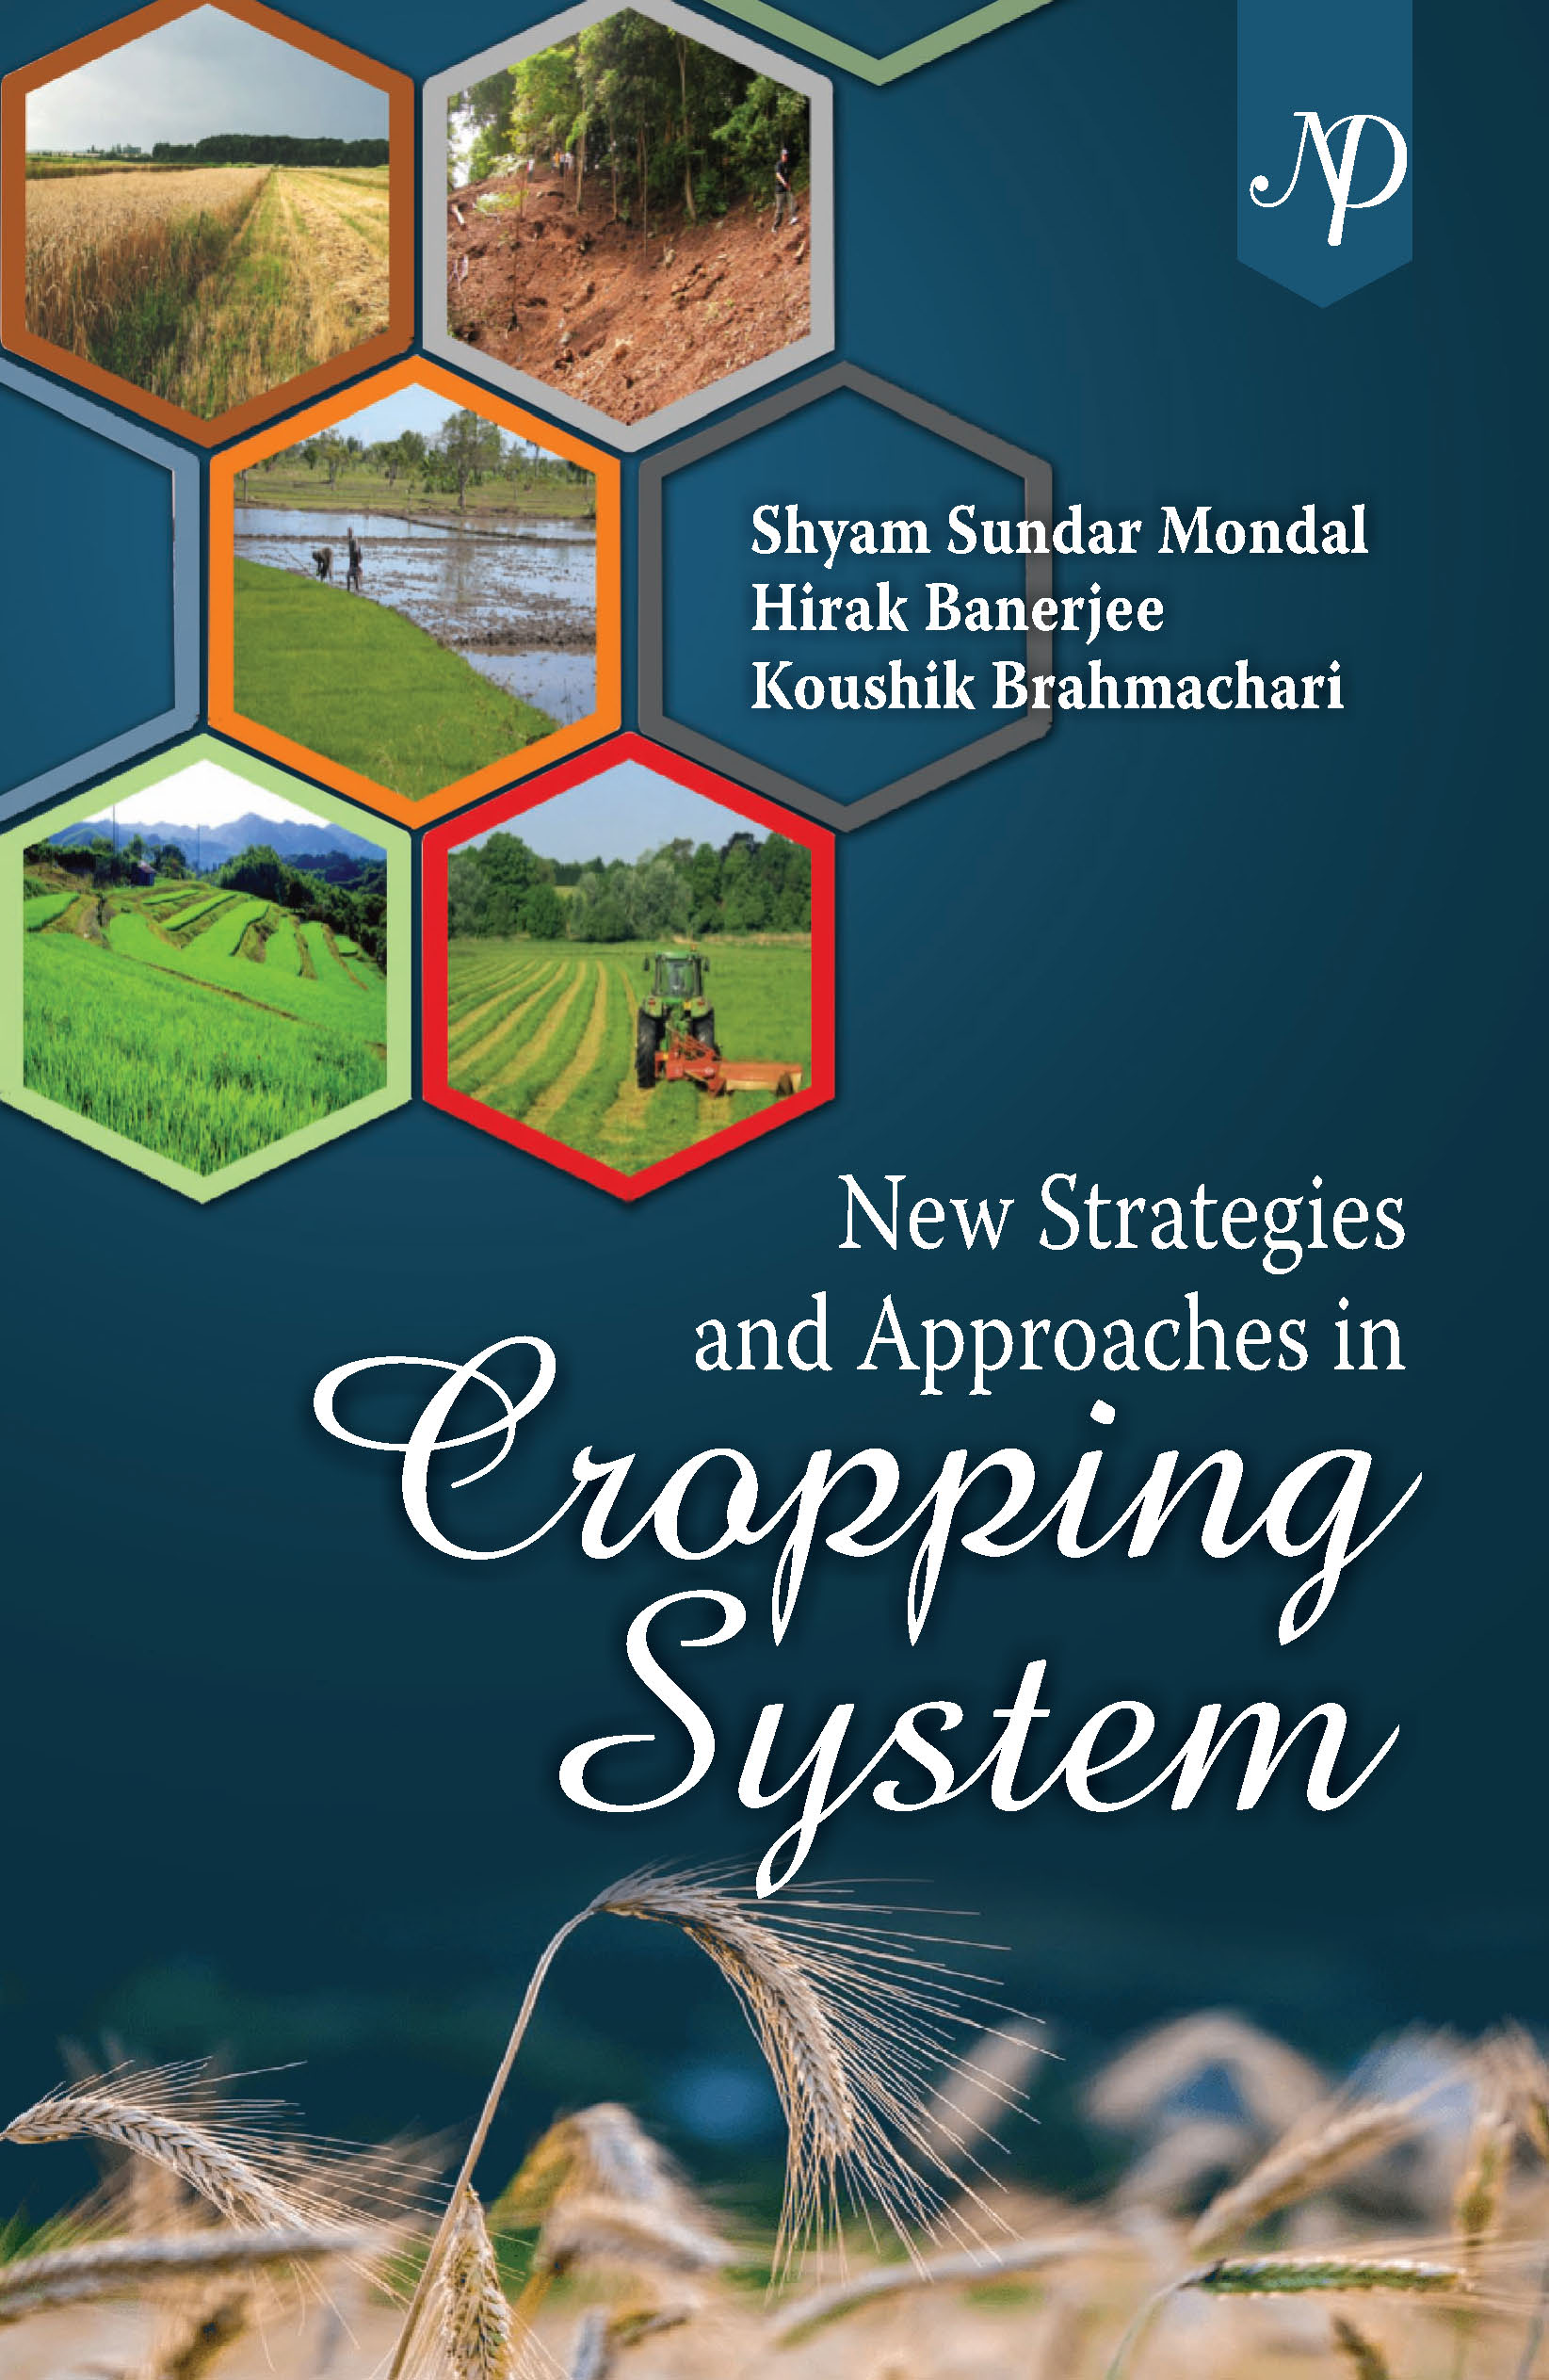 New Strategies and Approaches in Cropping System Cover.jpg